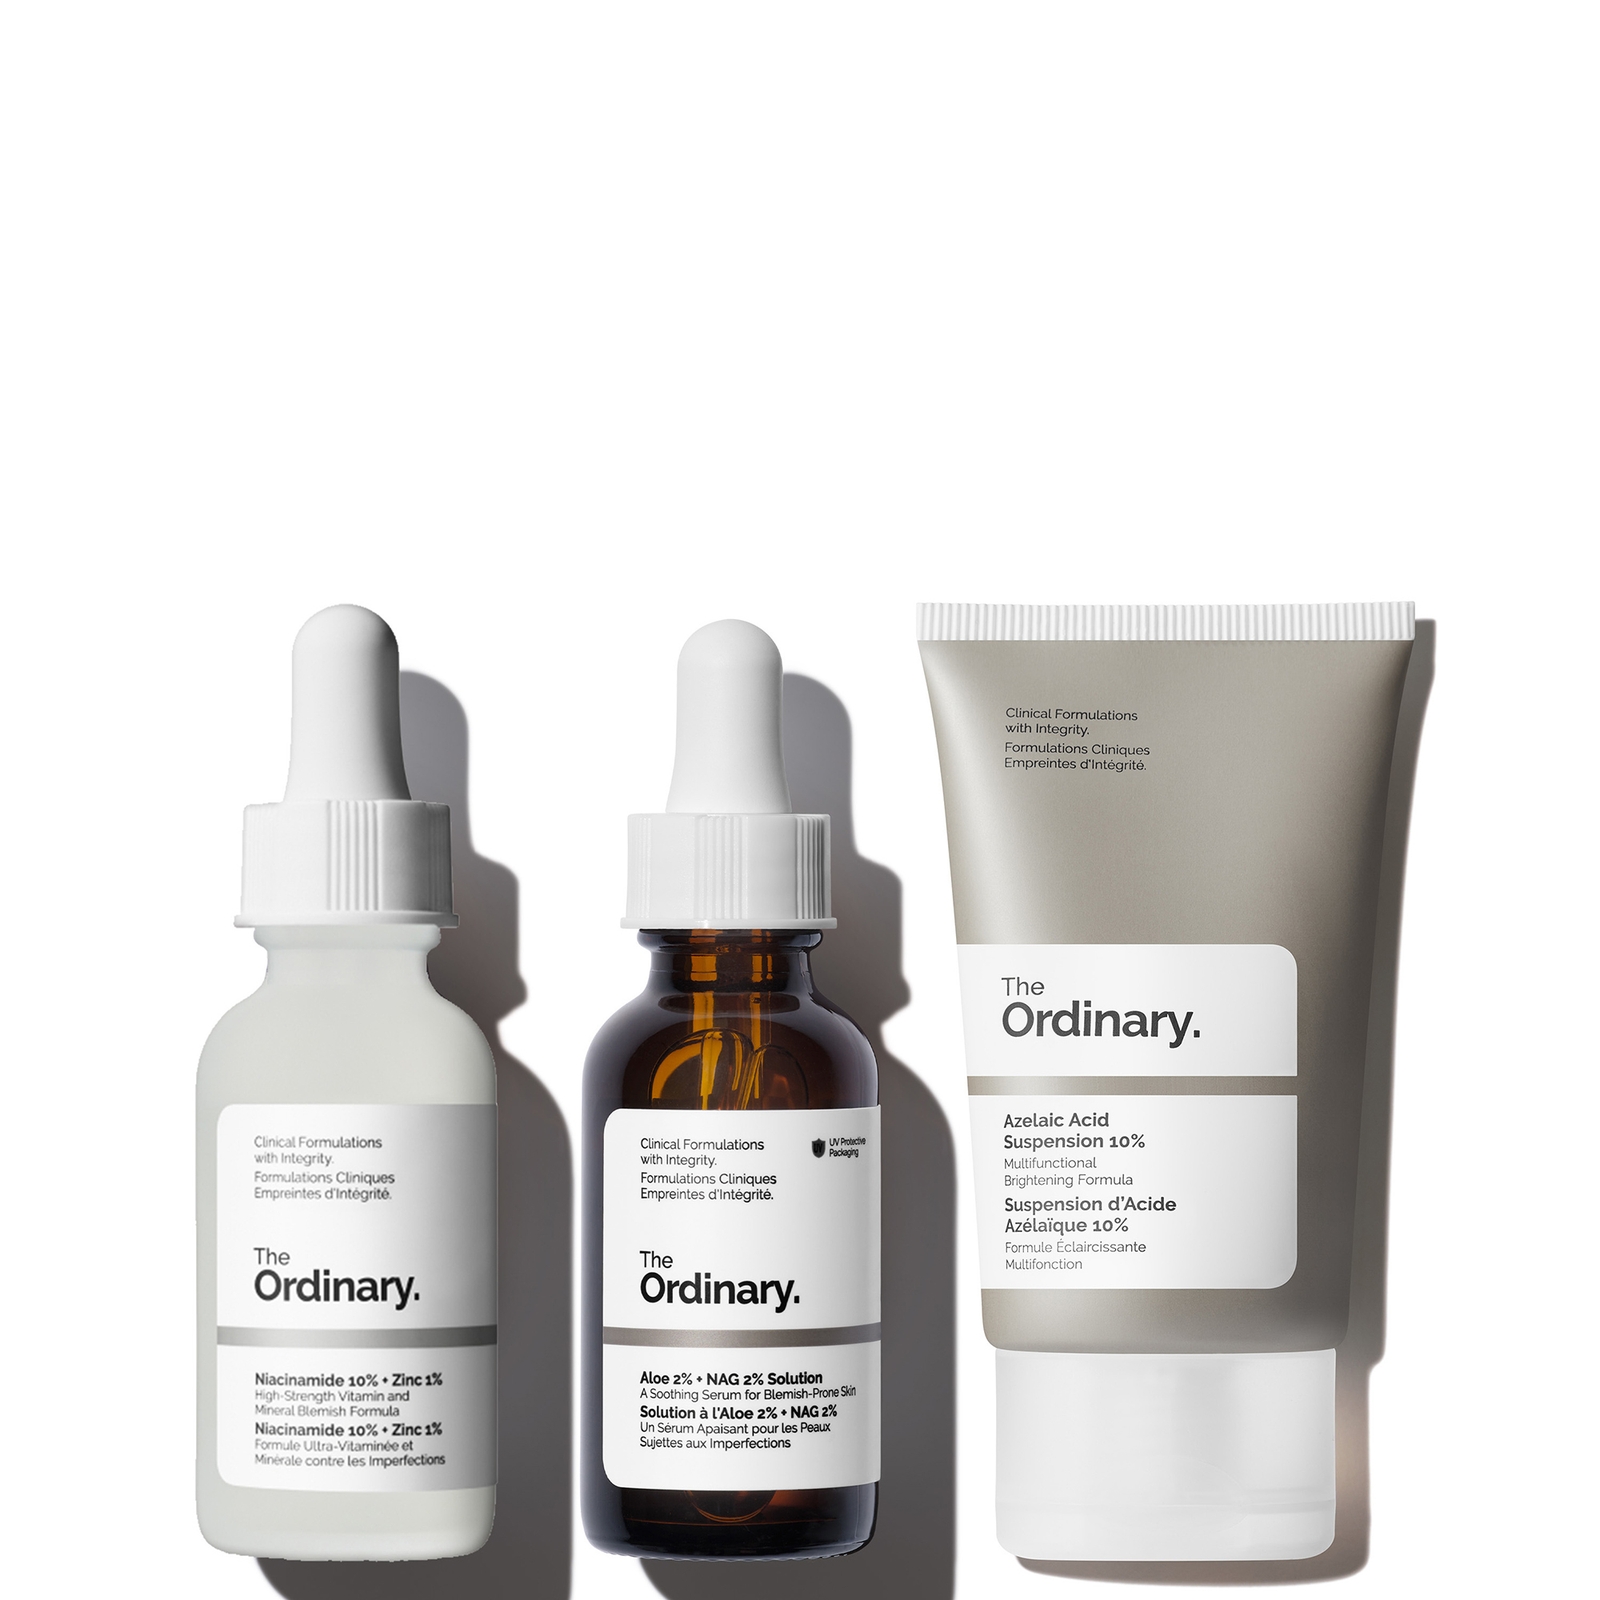 The Ordinary The Blemish-Prone Collection